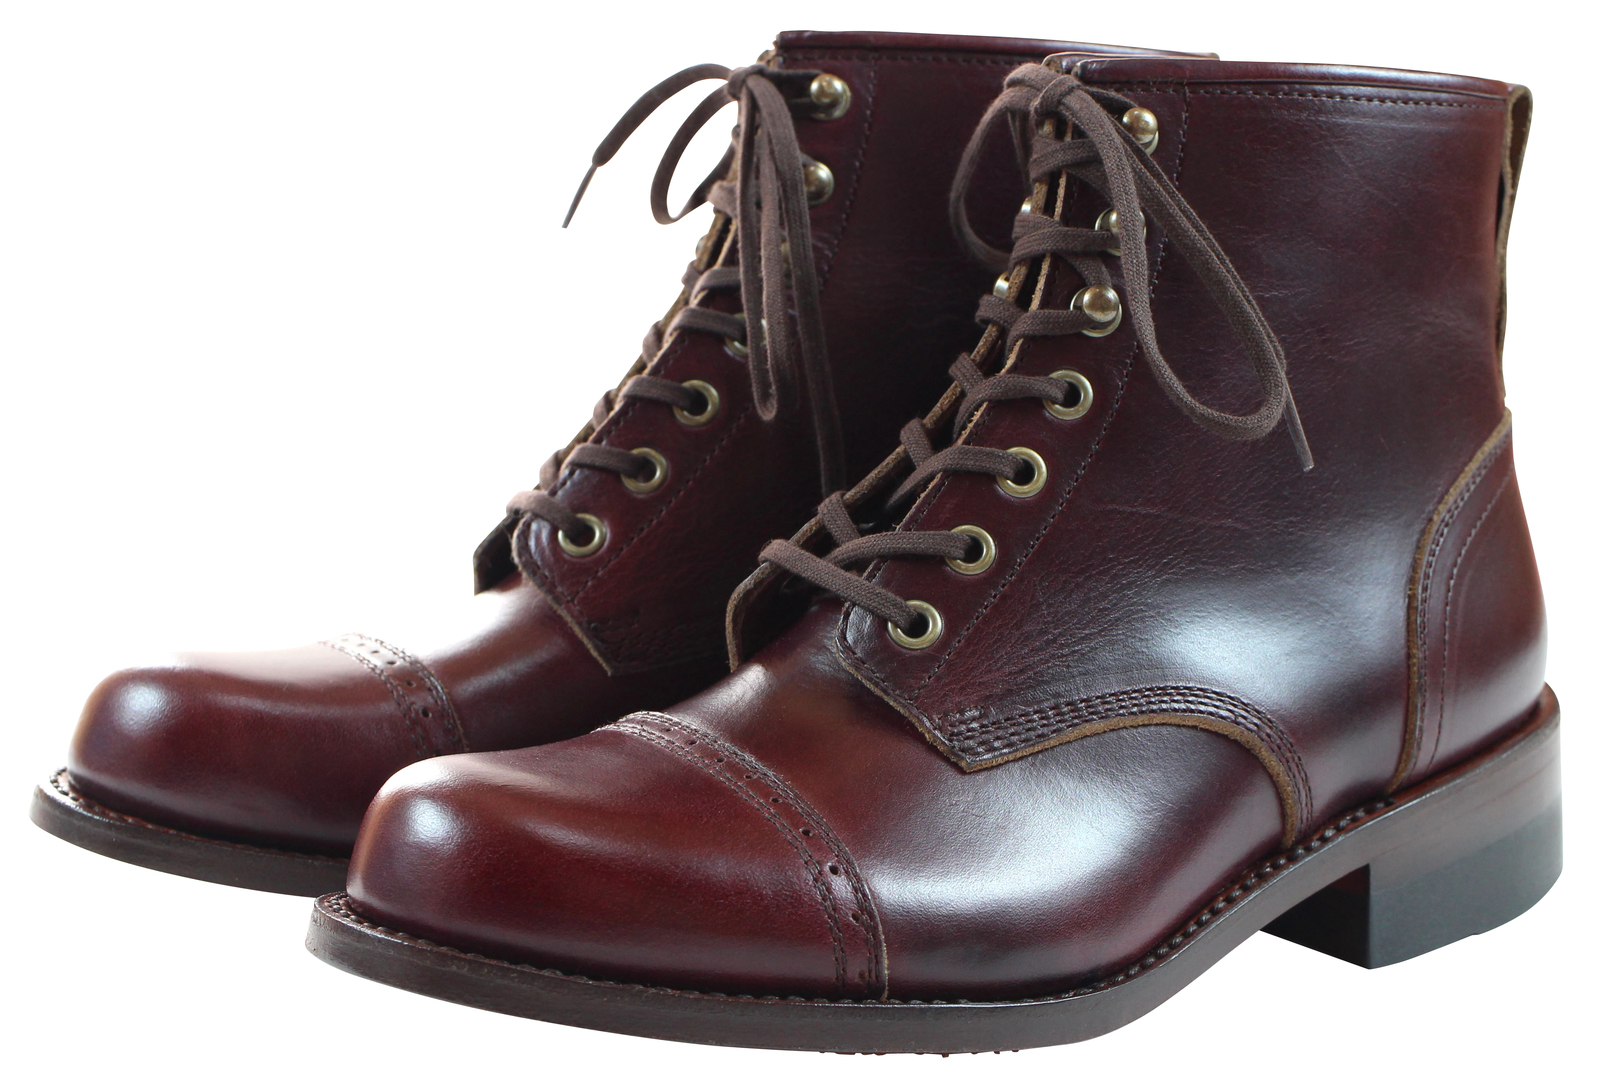 northwick shortwing boot